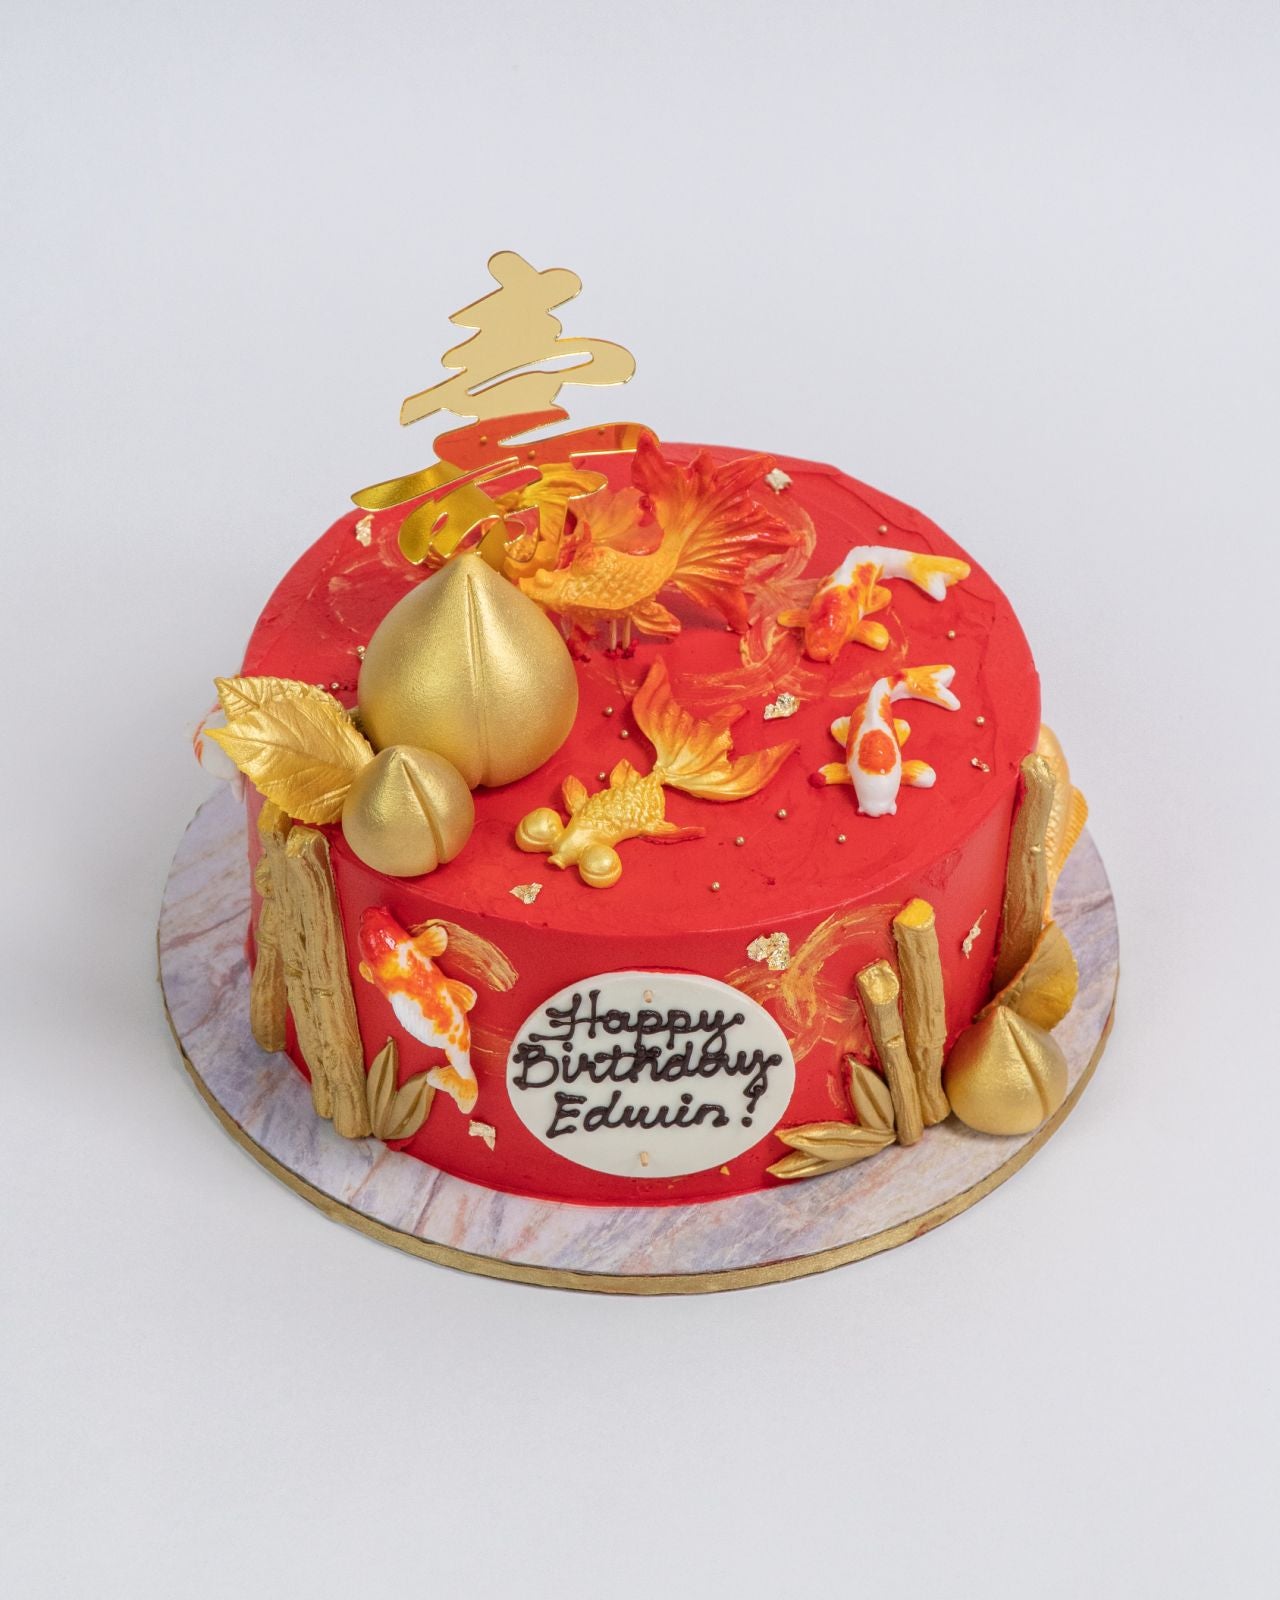 Why Chinese Birthday Cakes Aren't Sweet